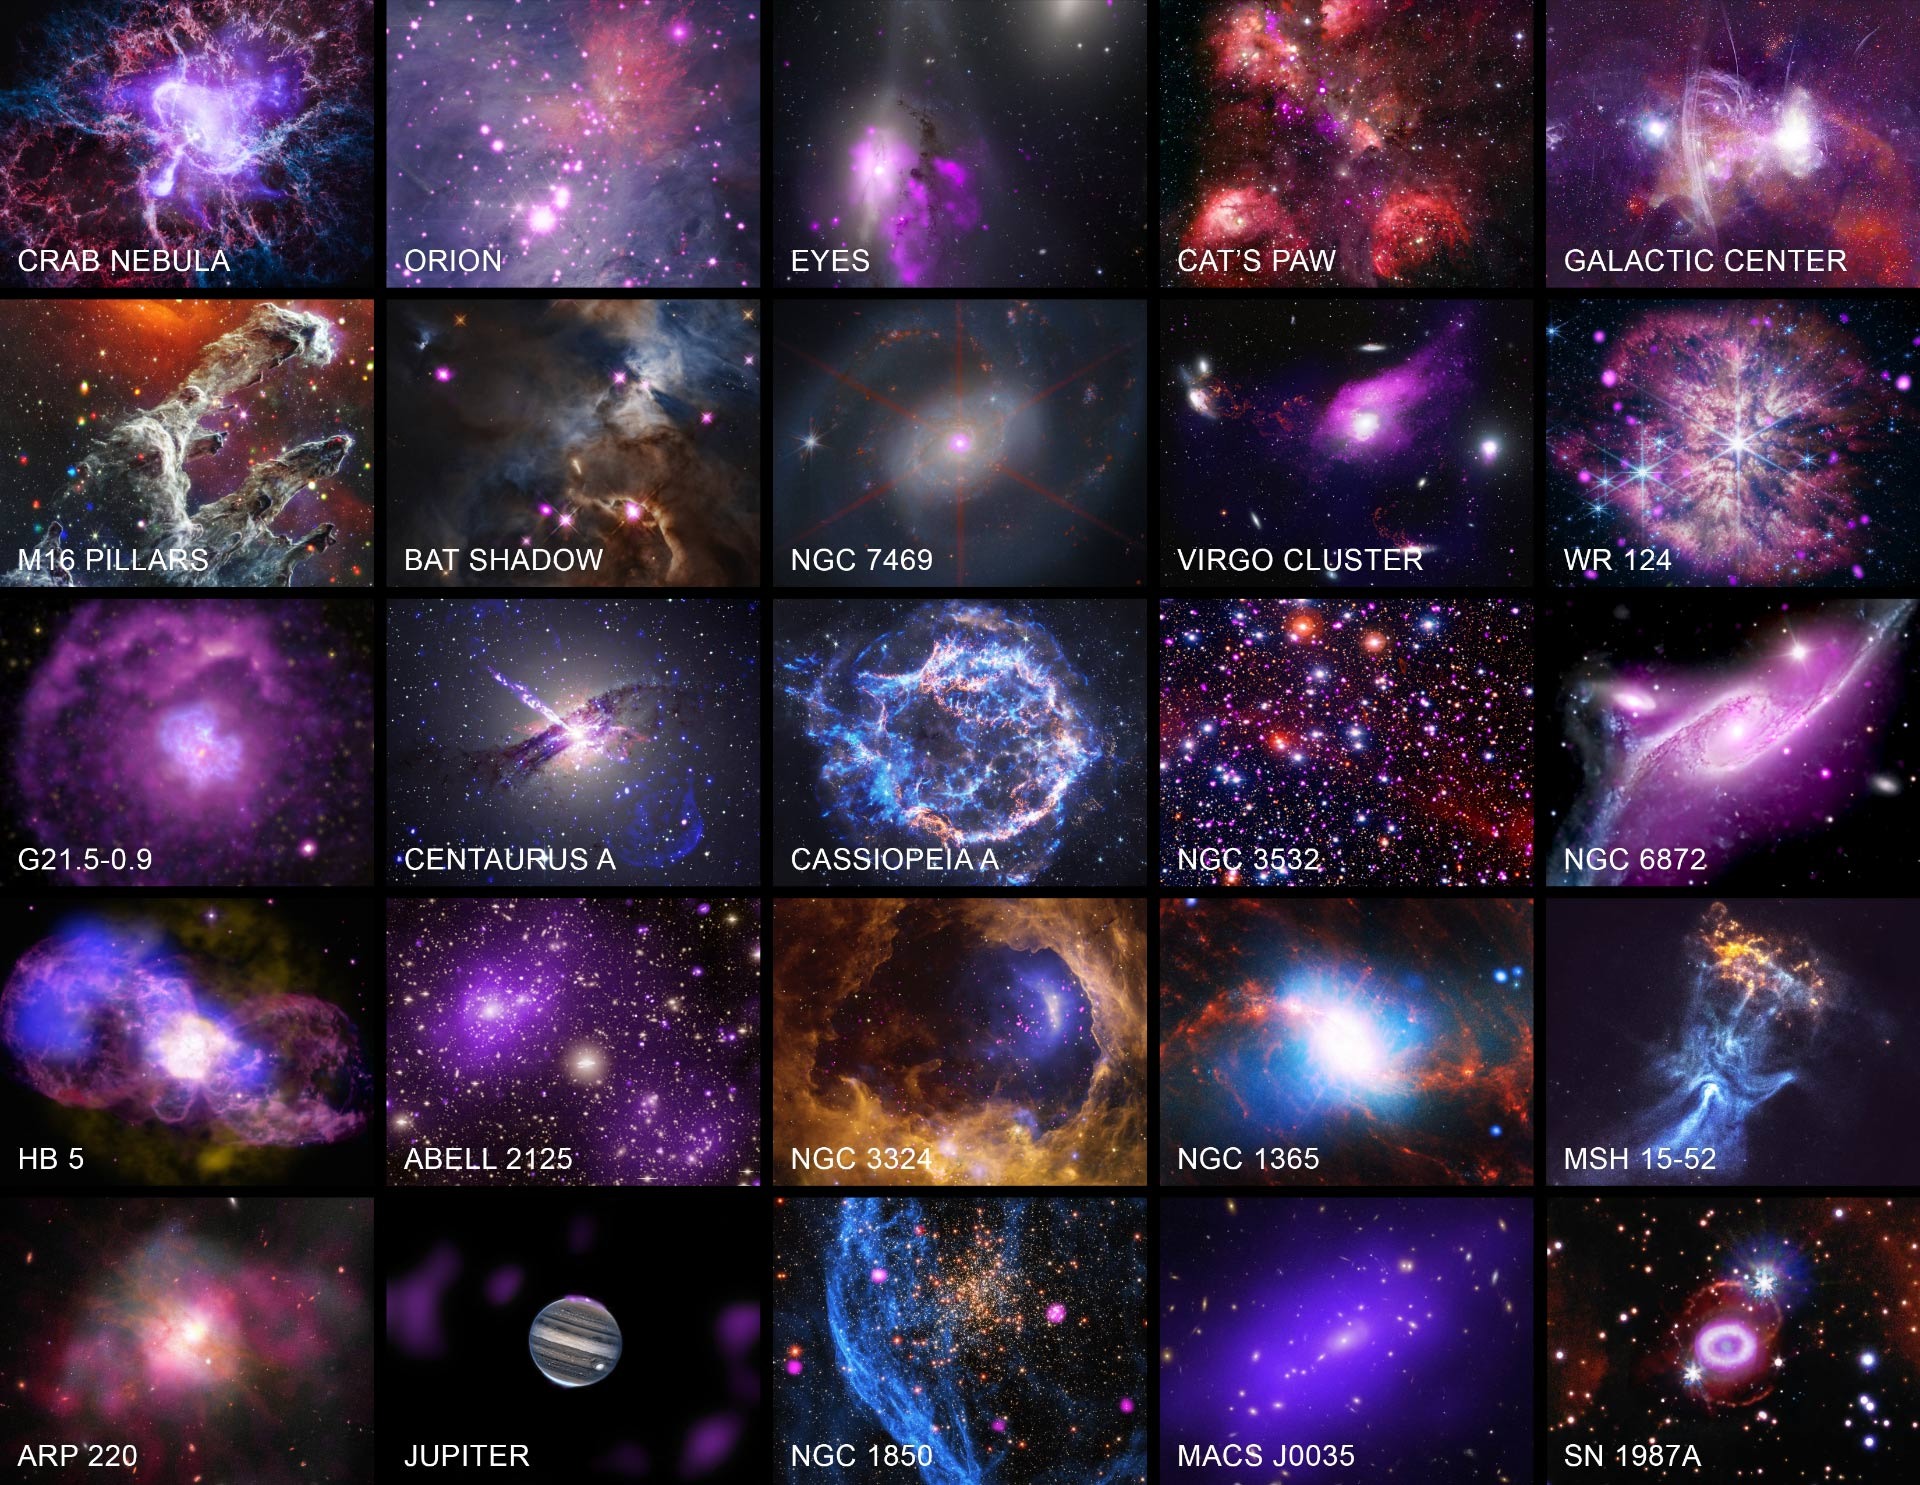 Chandra Observatory celebrates 25 years in space with a collection of stunning photographs of the Universe